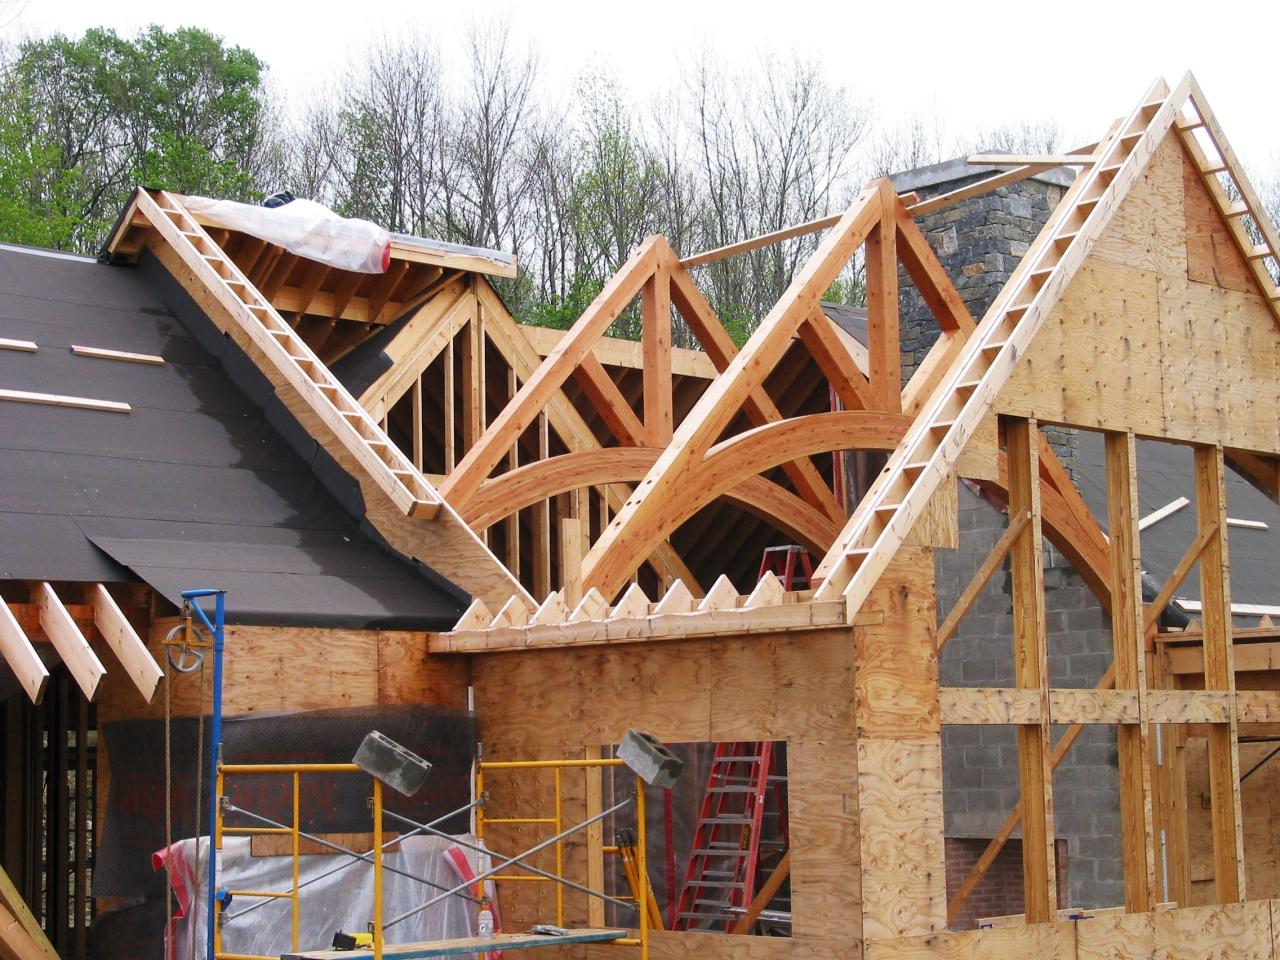 Wood construction frame light homes building house framed structures methods united states management project timber types fire frames buildings parts